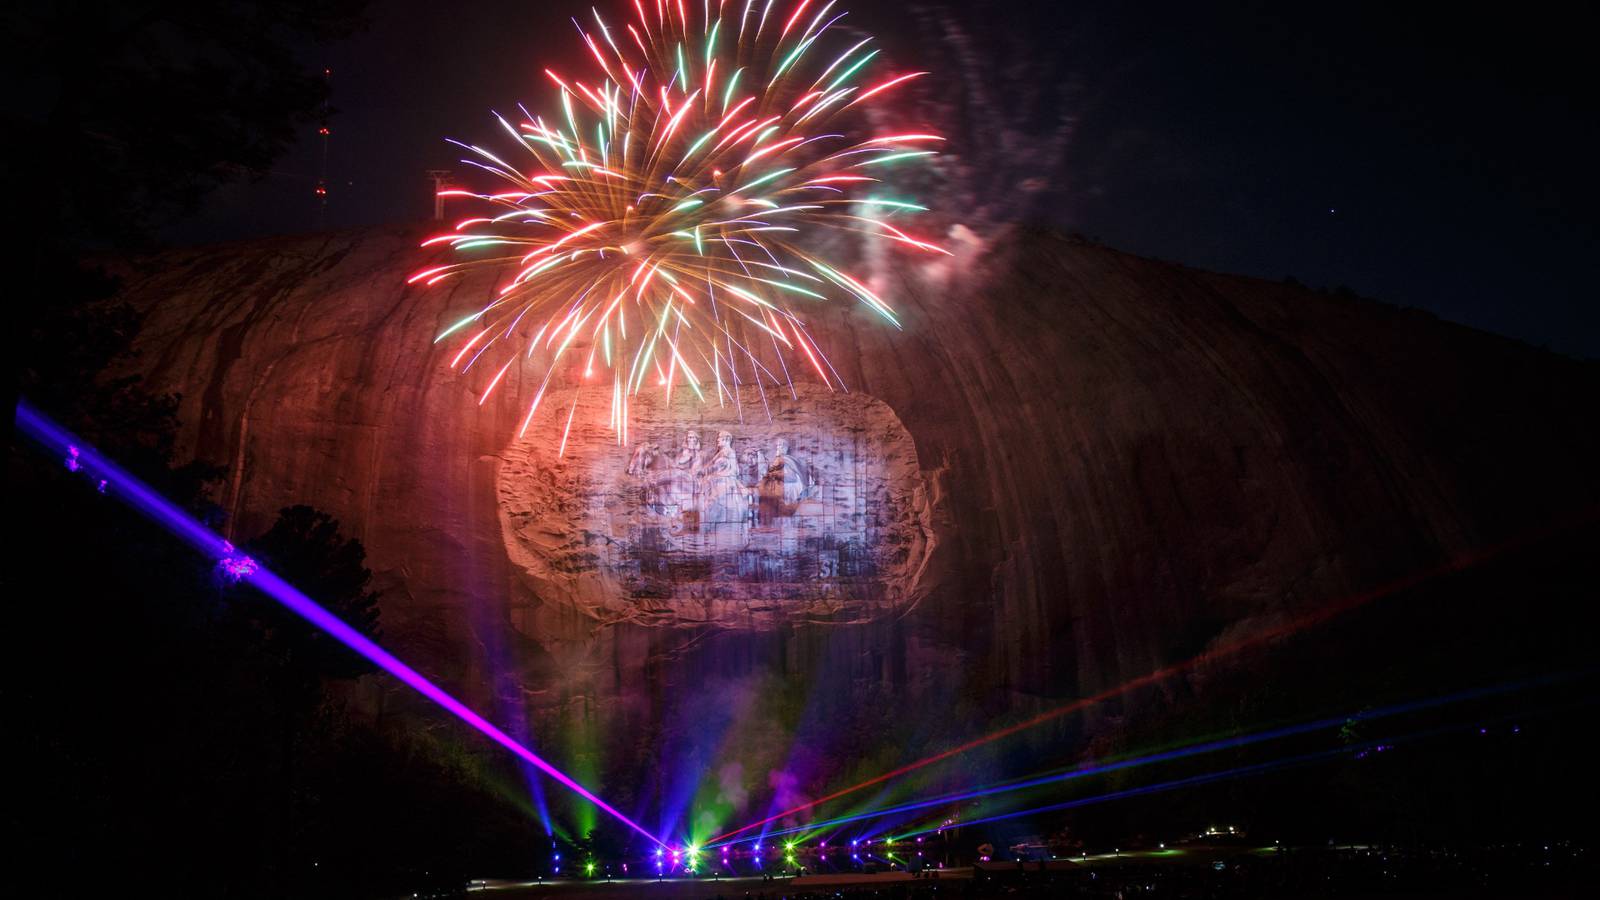 Saturday is your last chance to see Stone Mountain Park’s classic laser